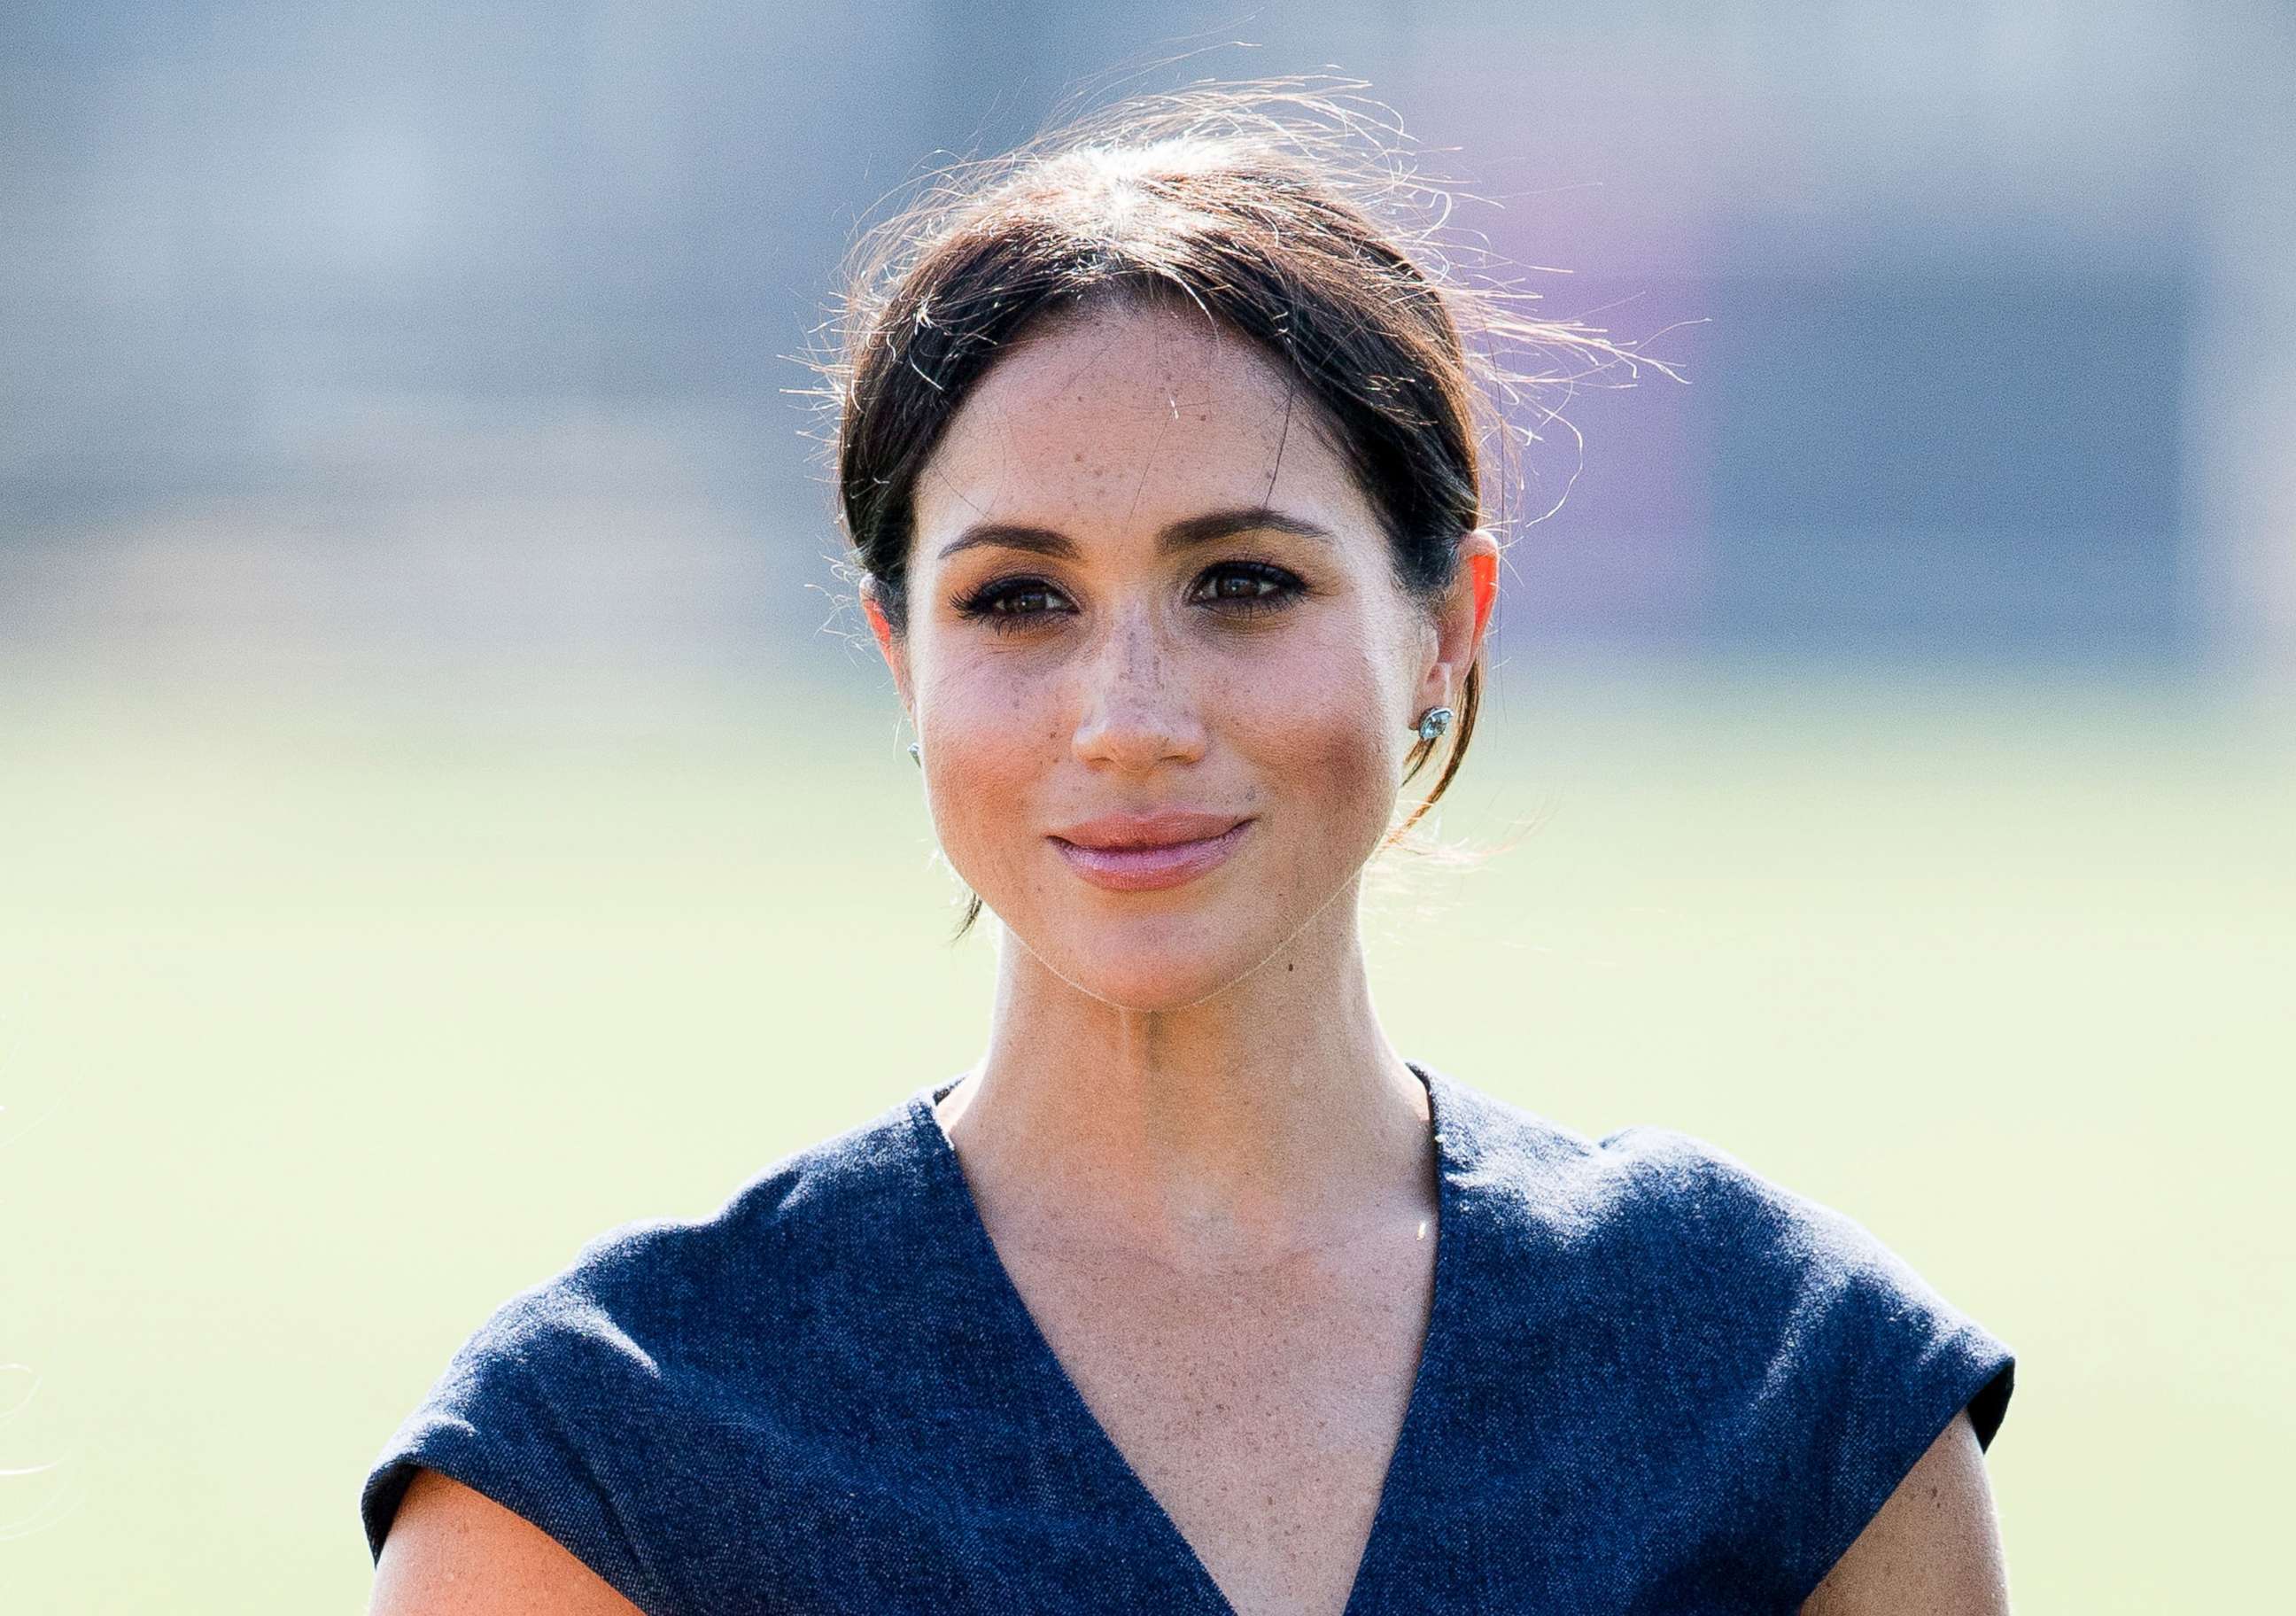 PHOTO: Meghan Markle, Duchess of Sussex attends the Sentebale Polo 2018 held at the Royal County of Berkshire Polo Club, July 26, 2018, in Windsor, England.